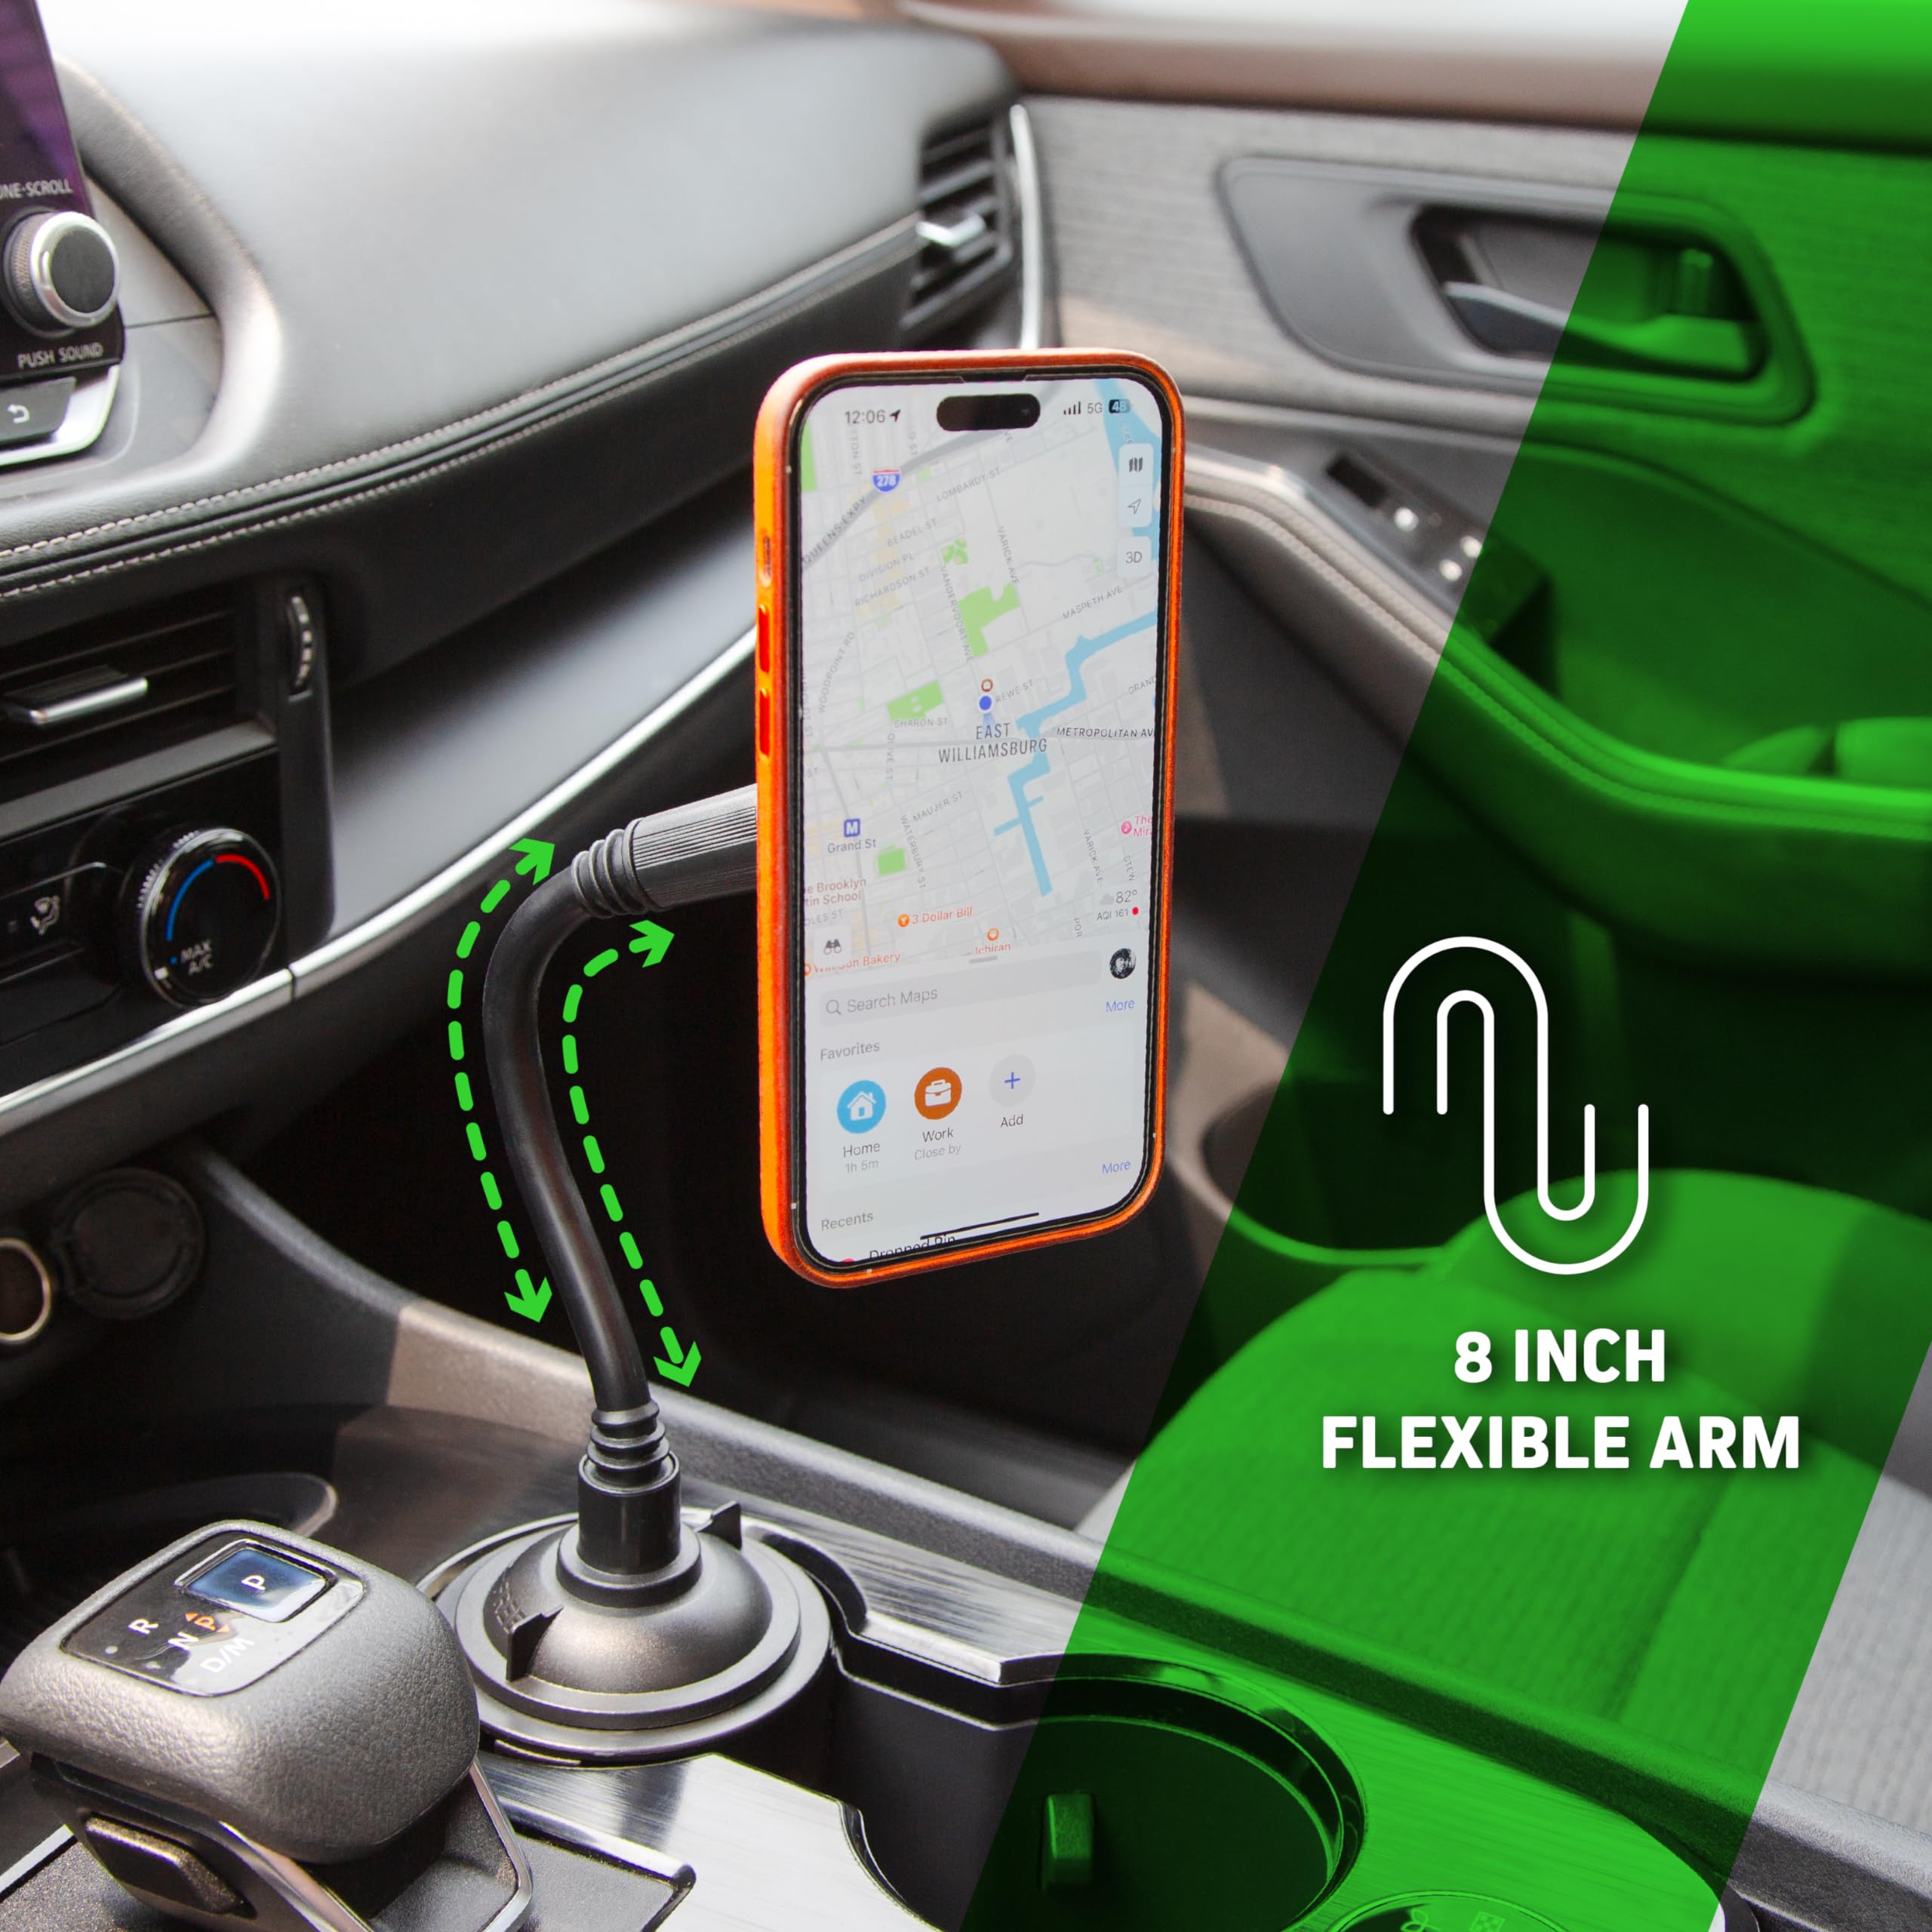 Chargeworx Magnetic Cupholder Car Mount